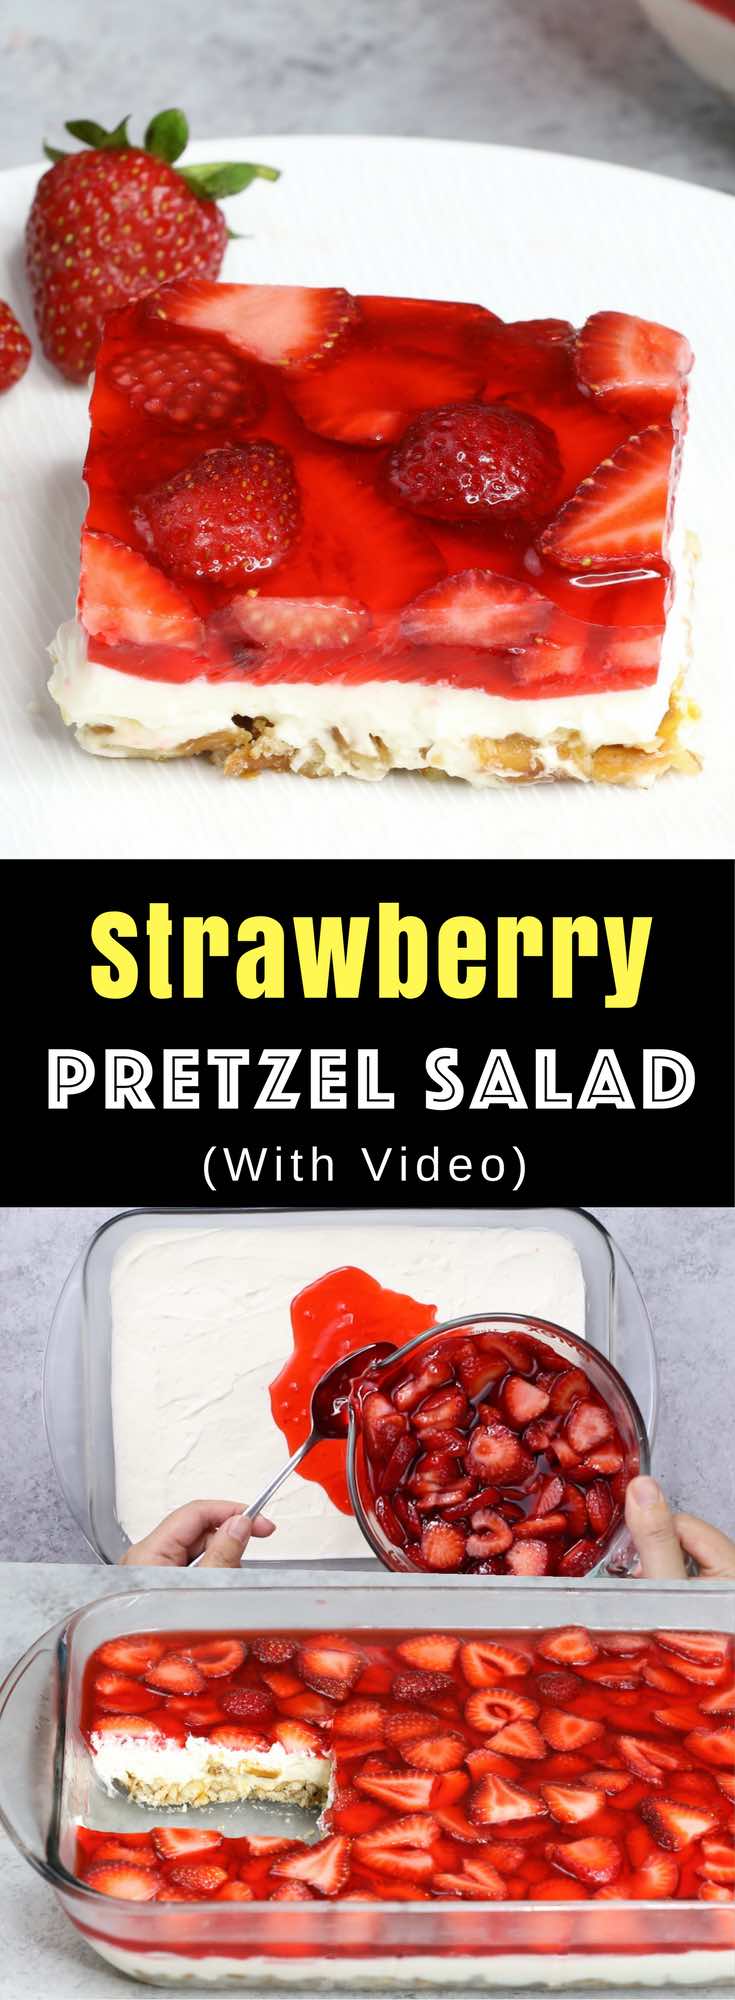 Strawberry Pretzel Salad – A guaranteed hit at any parties! In one bite, you will get the saltiness from its pretzel crust, sweetness from the creamy and smooth cream cheese, and the fresh flavor from the strawberry and jello top layer! So irresistible! Great for holiday and birthday parties. Easy recipe, party desserts. Vegetarian. Video recipe. | Tipbuzz.com